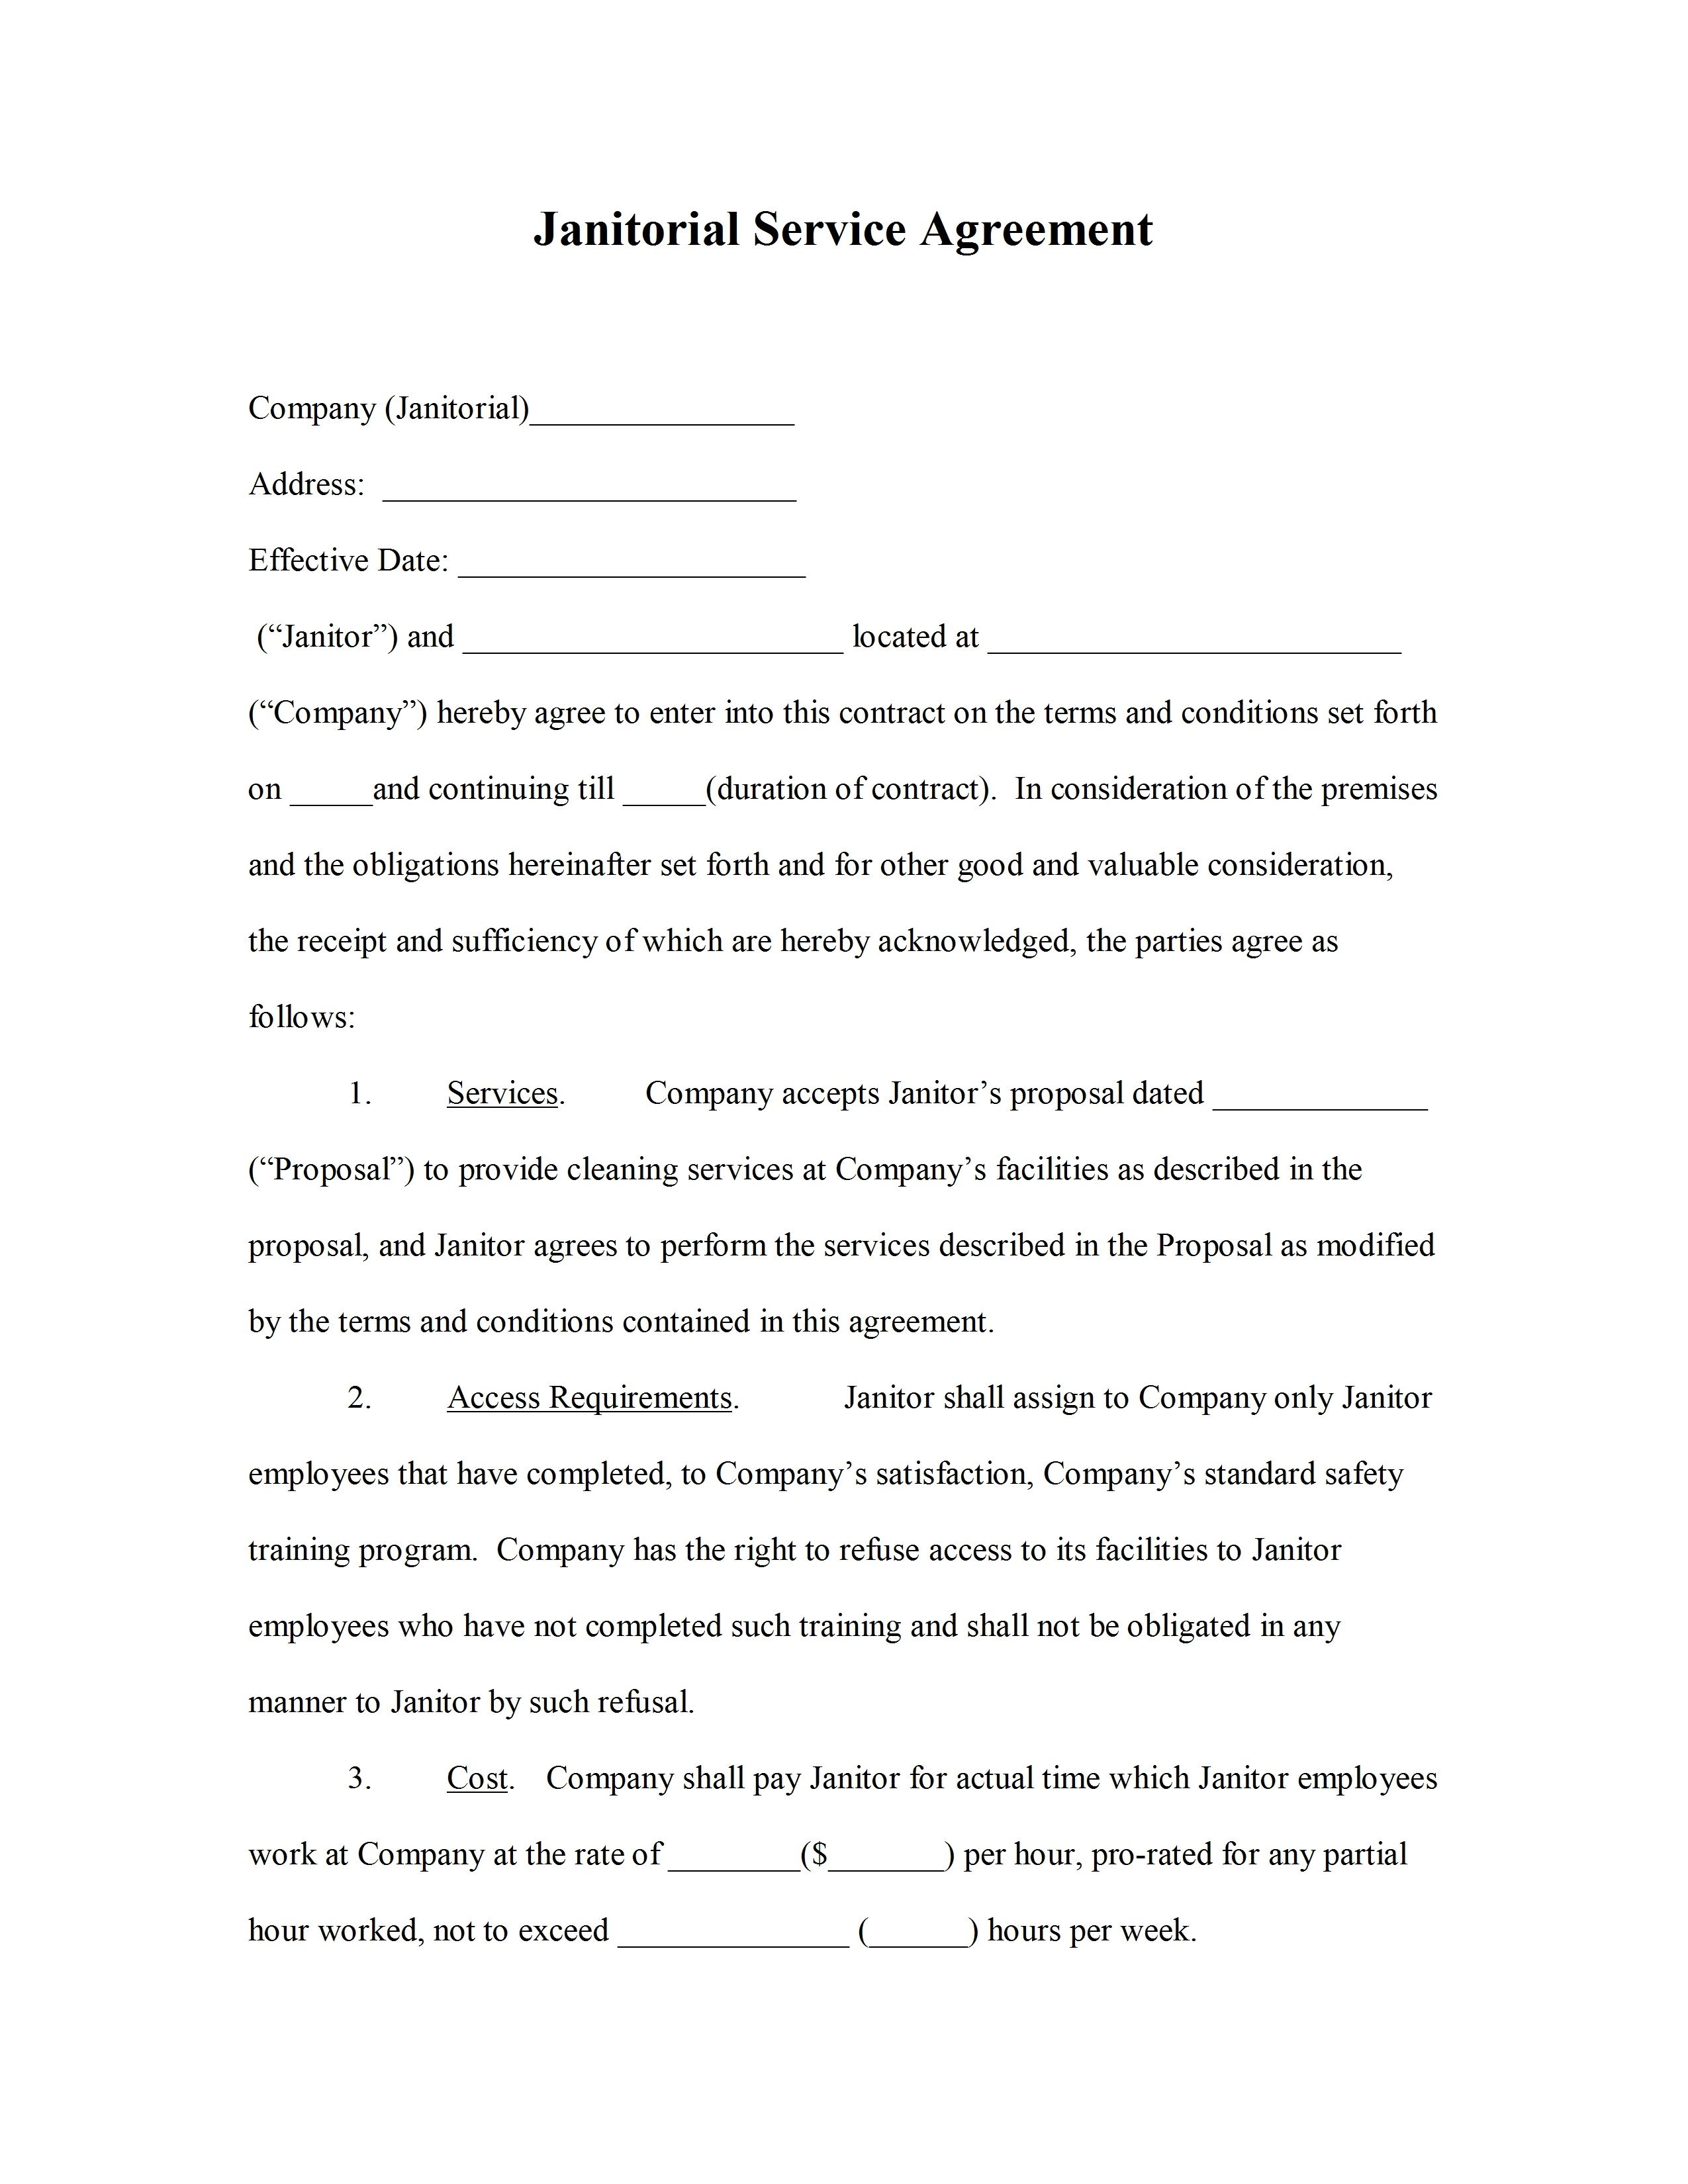 Cleaning Service Agreement Template: Janitorial Service Agreement - Free Printable Service Contract Forms